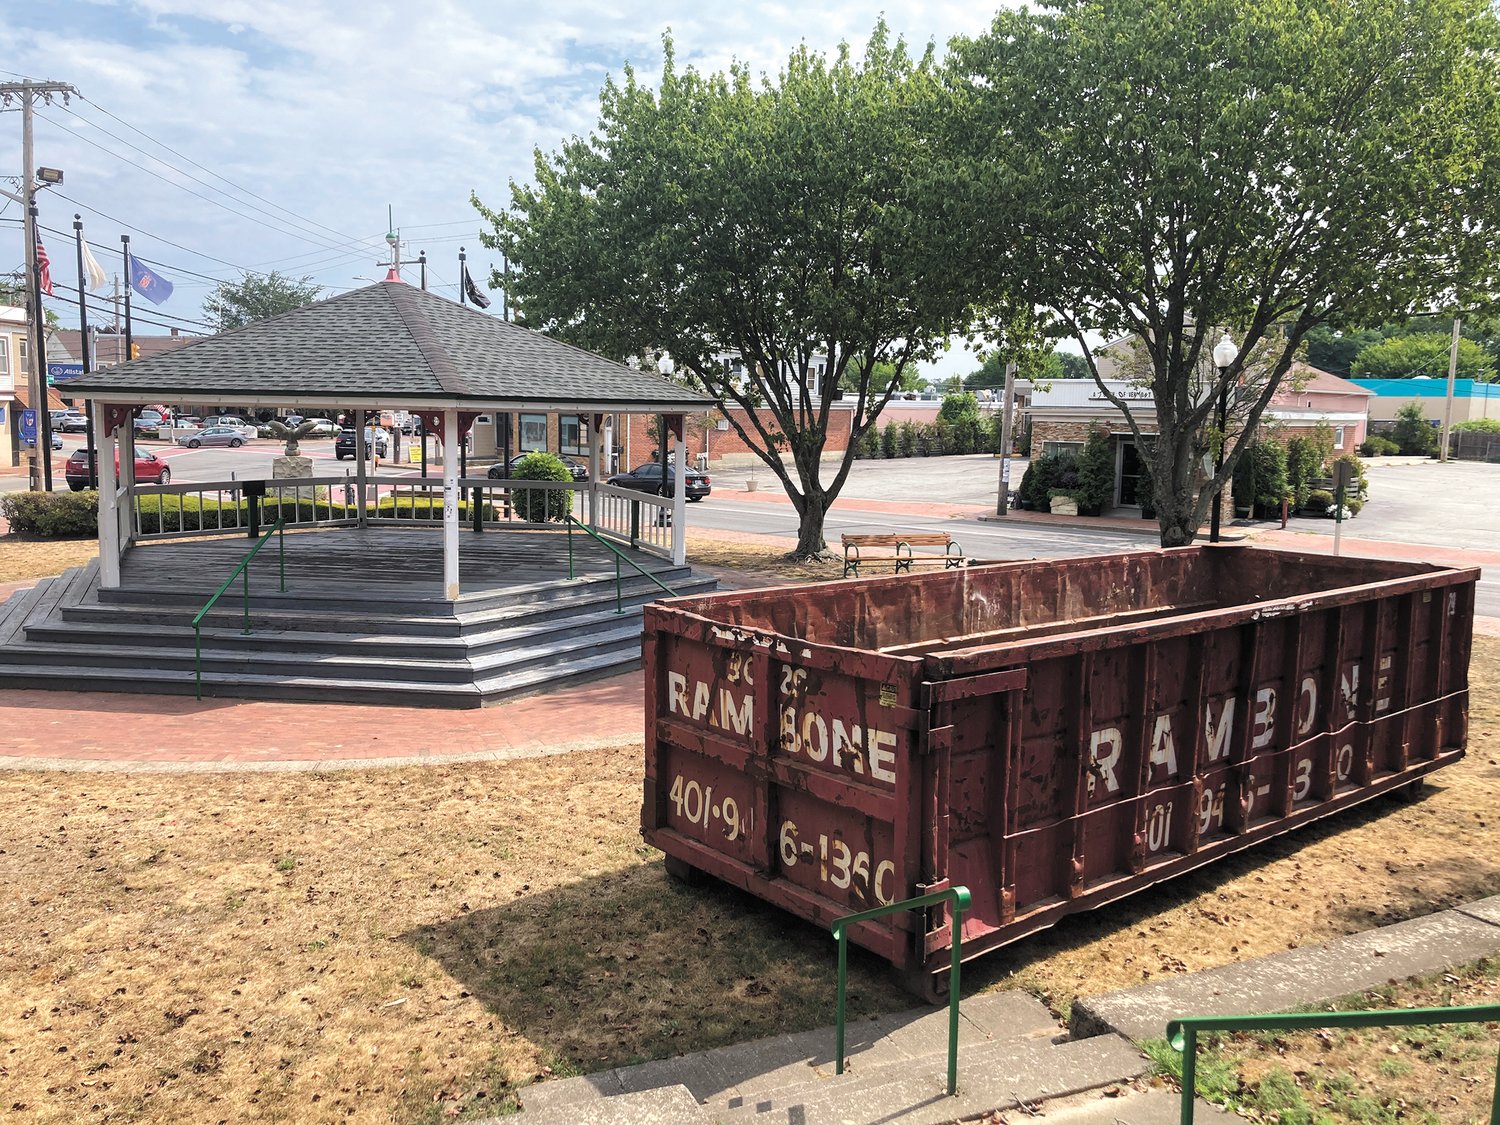 READY FOR IN-HOUSE WORK: A dumpster located by the Knightsville gazebo is getting ready for in-house site work for the Knightsville revitalization project. City workers will take down shrubs, trees and possibly level the hill. (Herald photo)